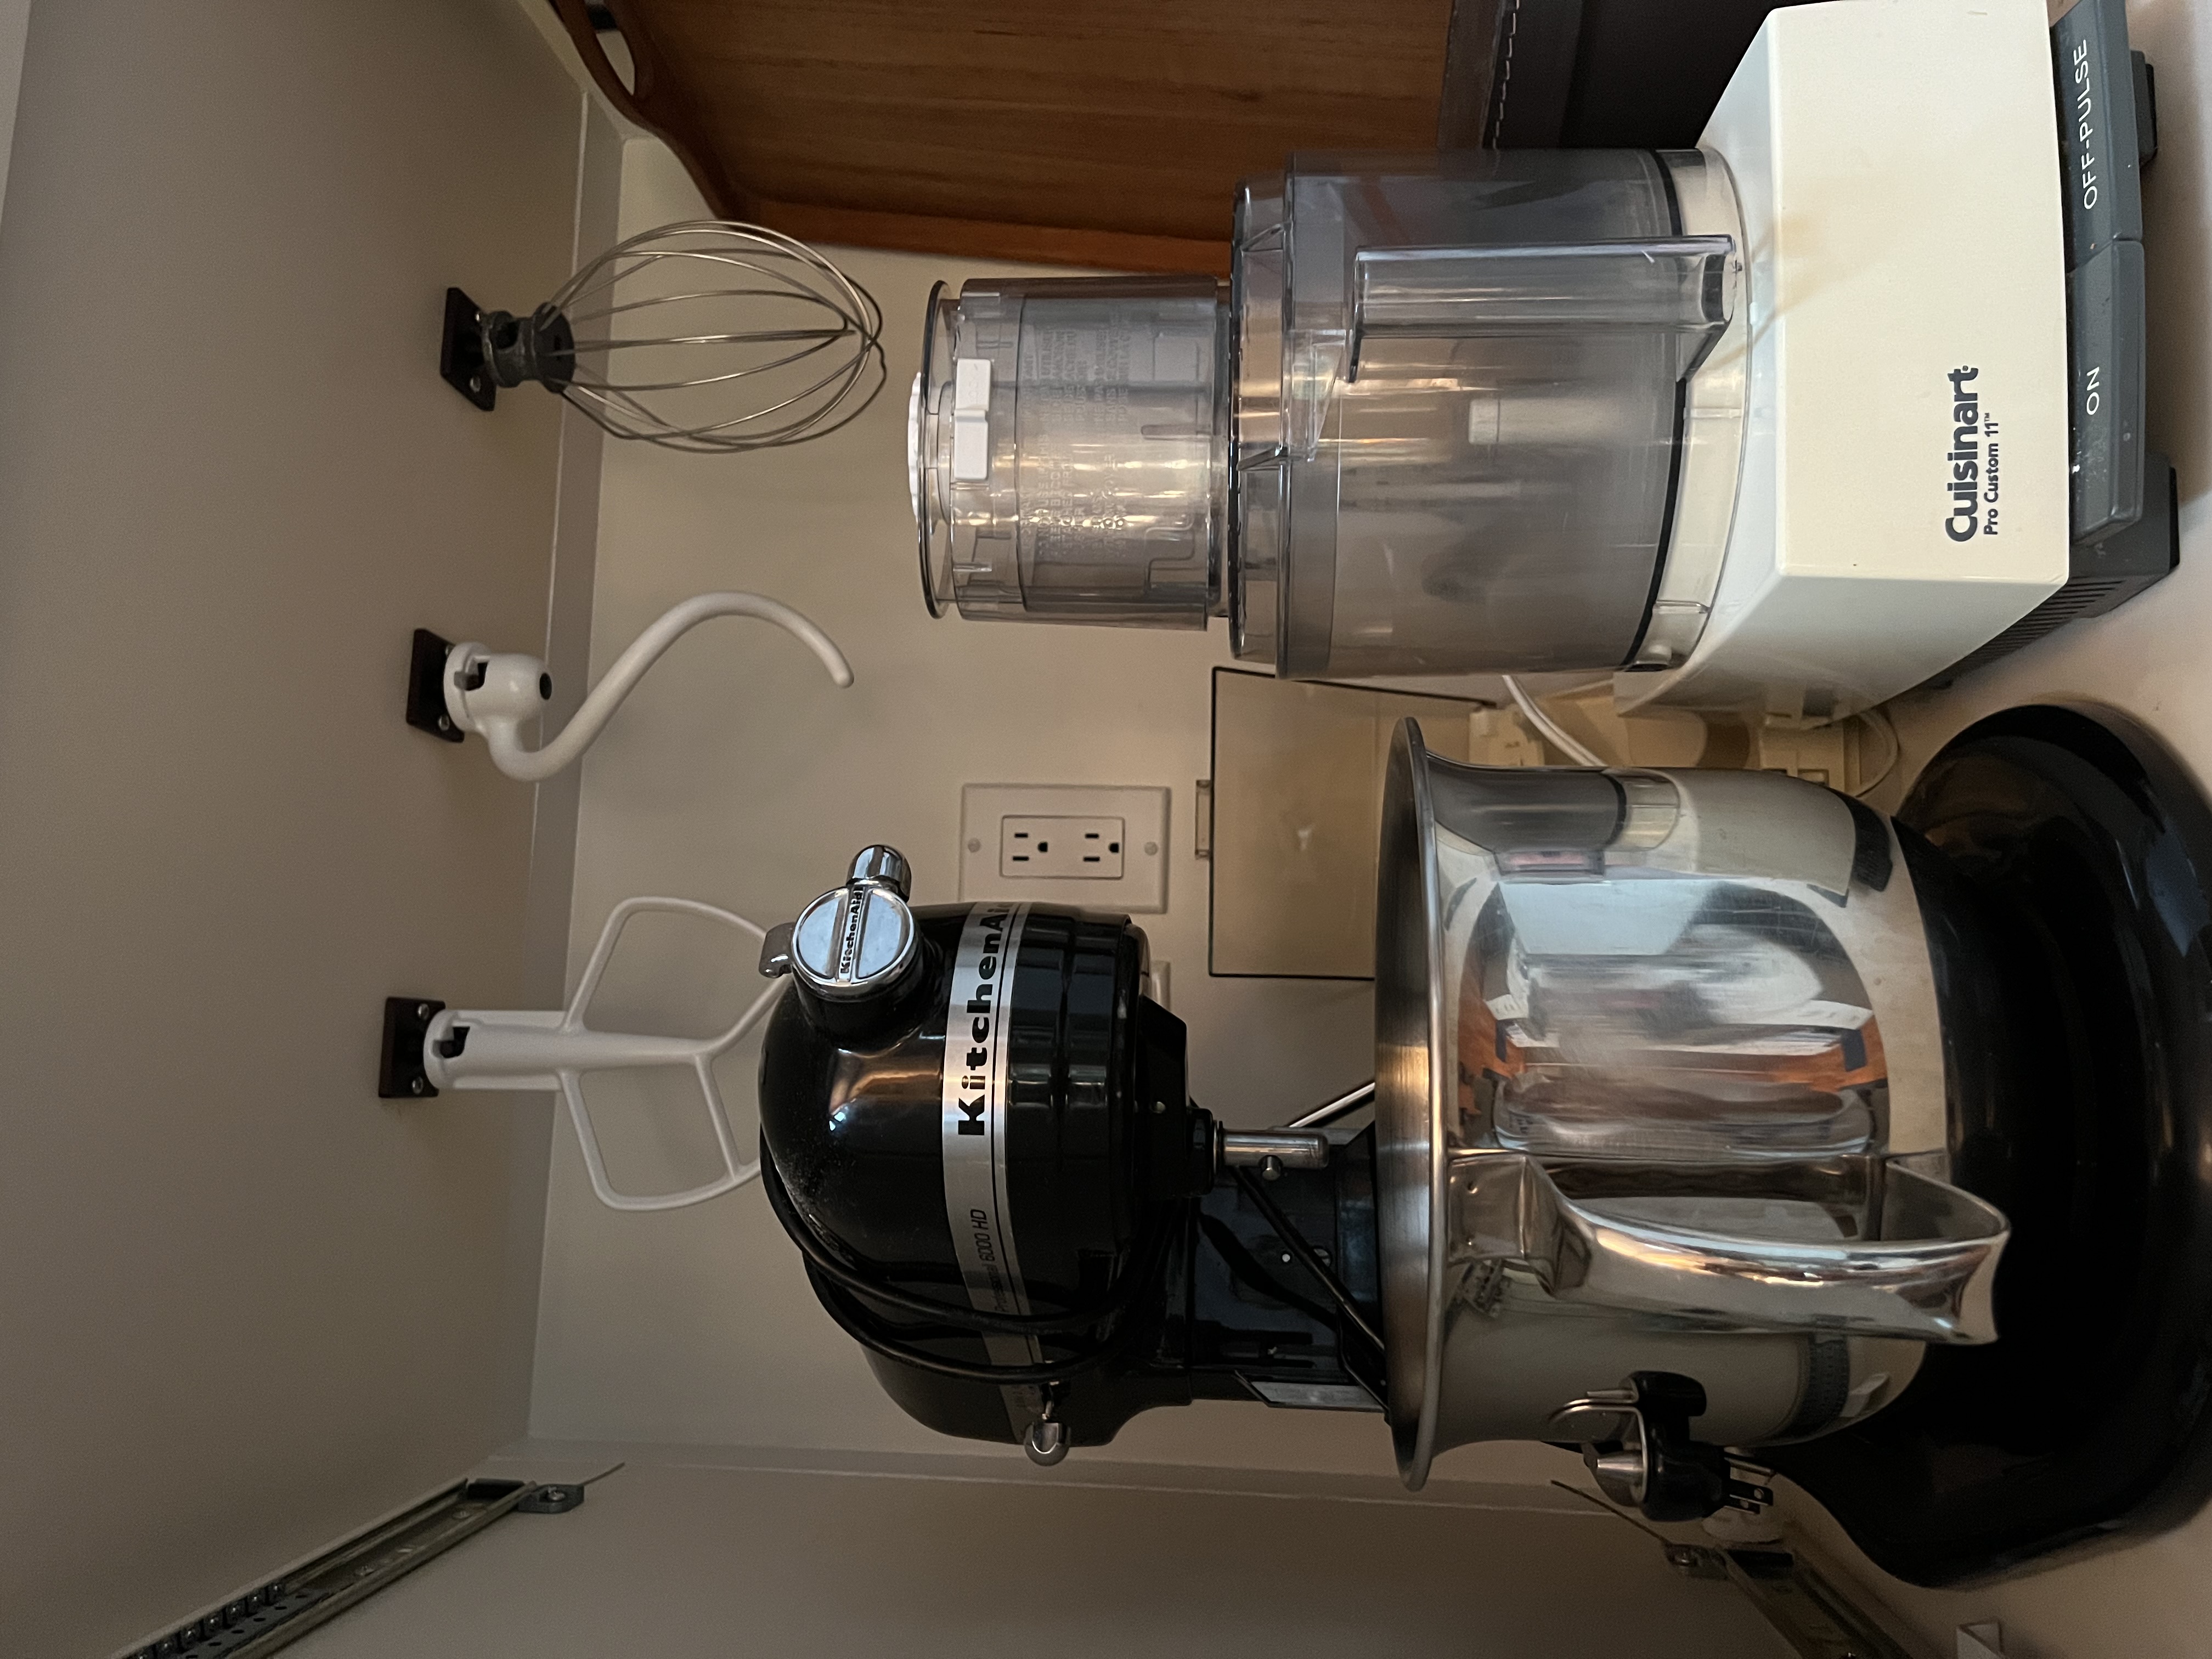 Kitchenaid Mixer Attachment Holder. by emoses